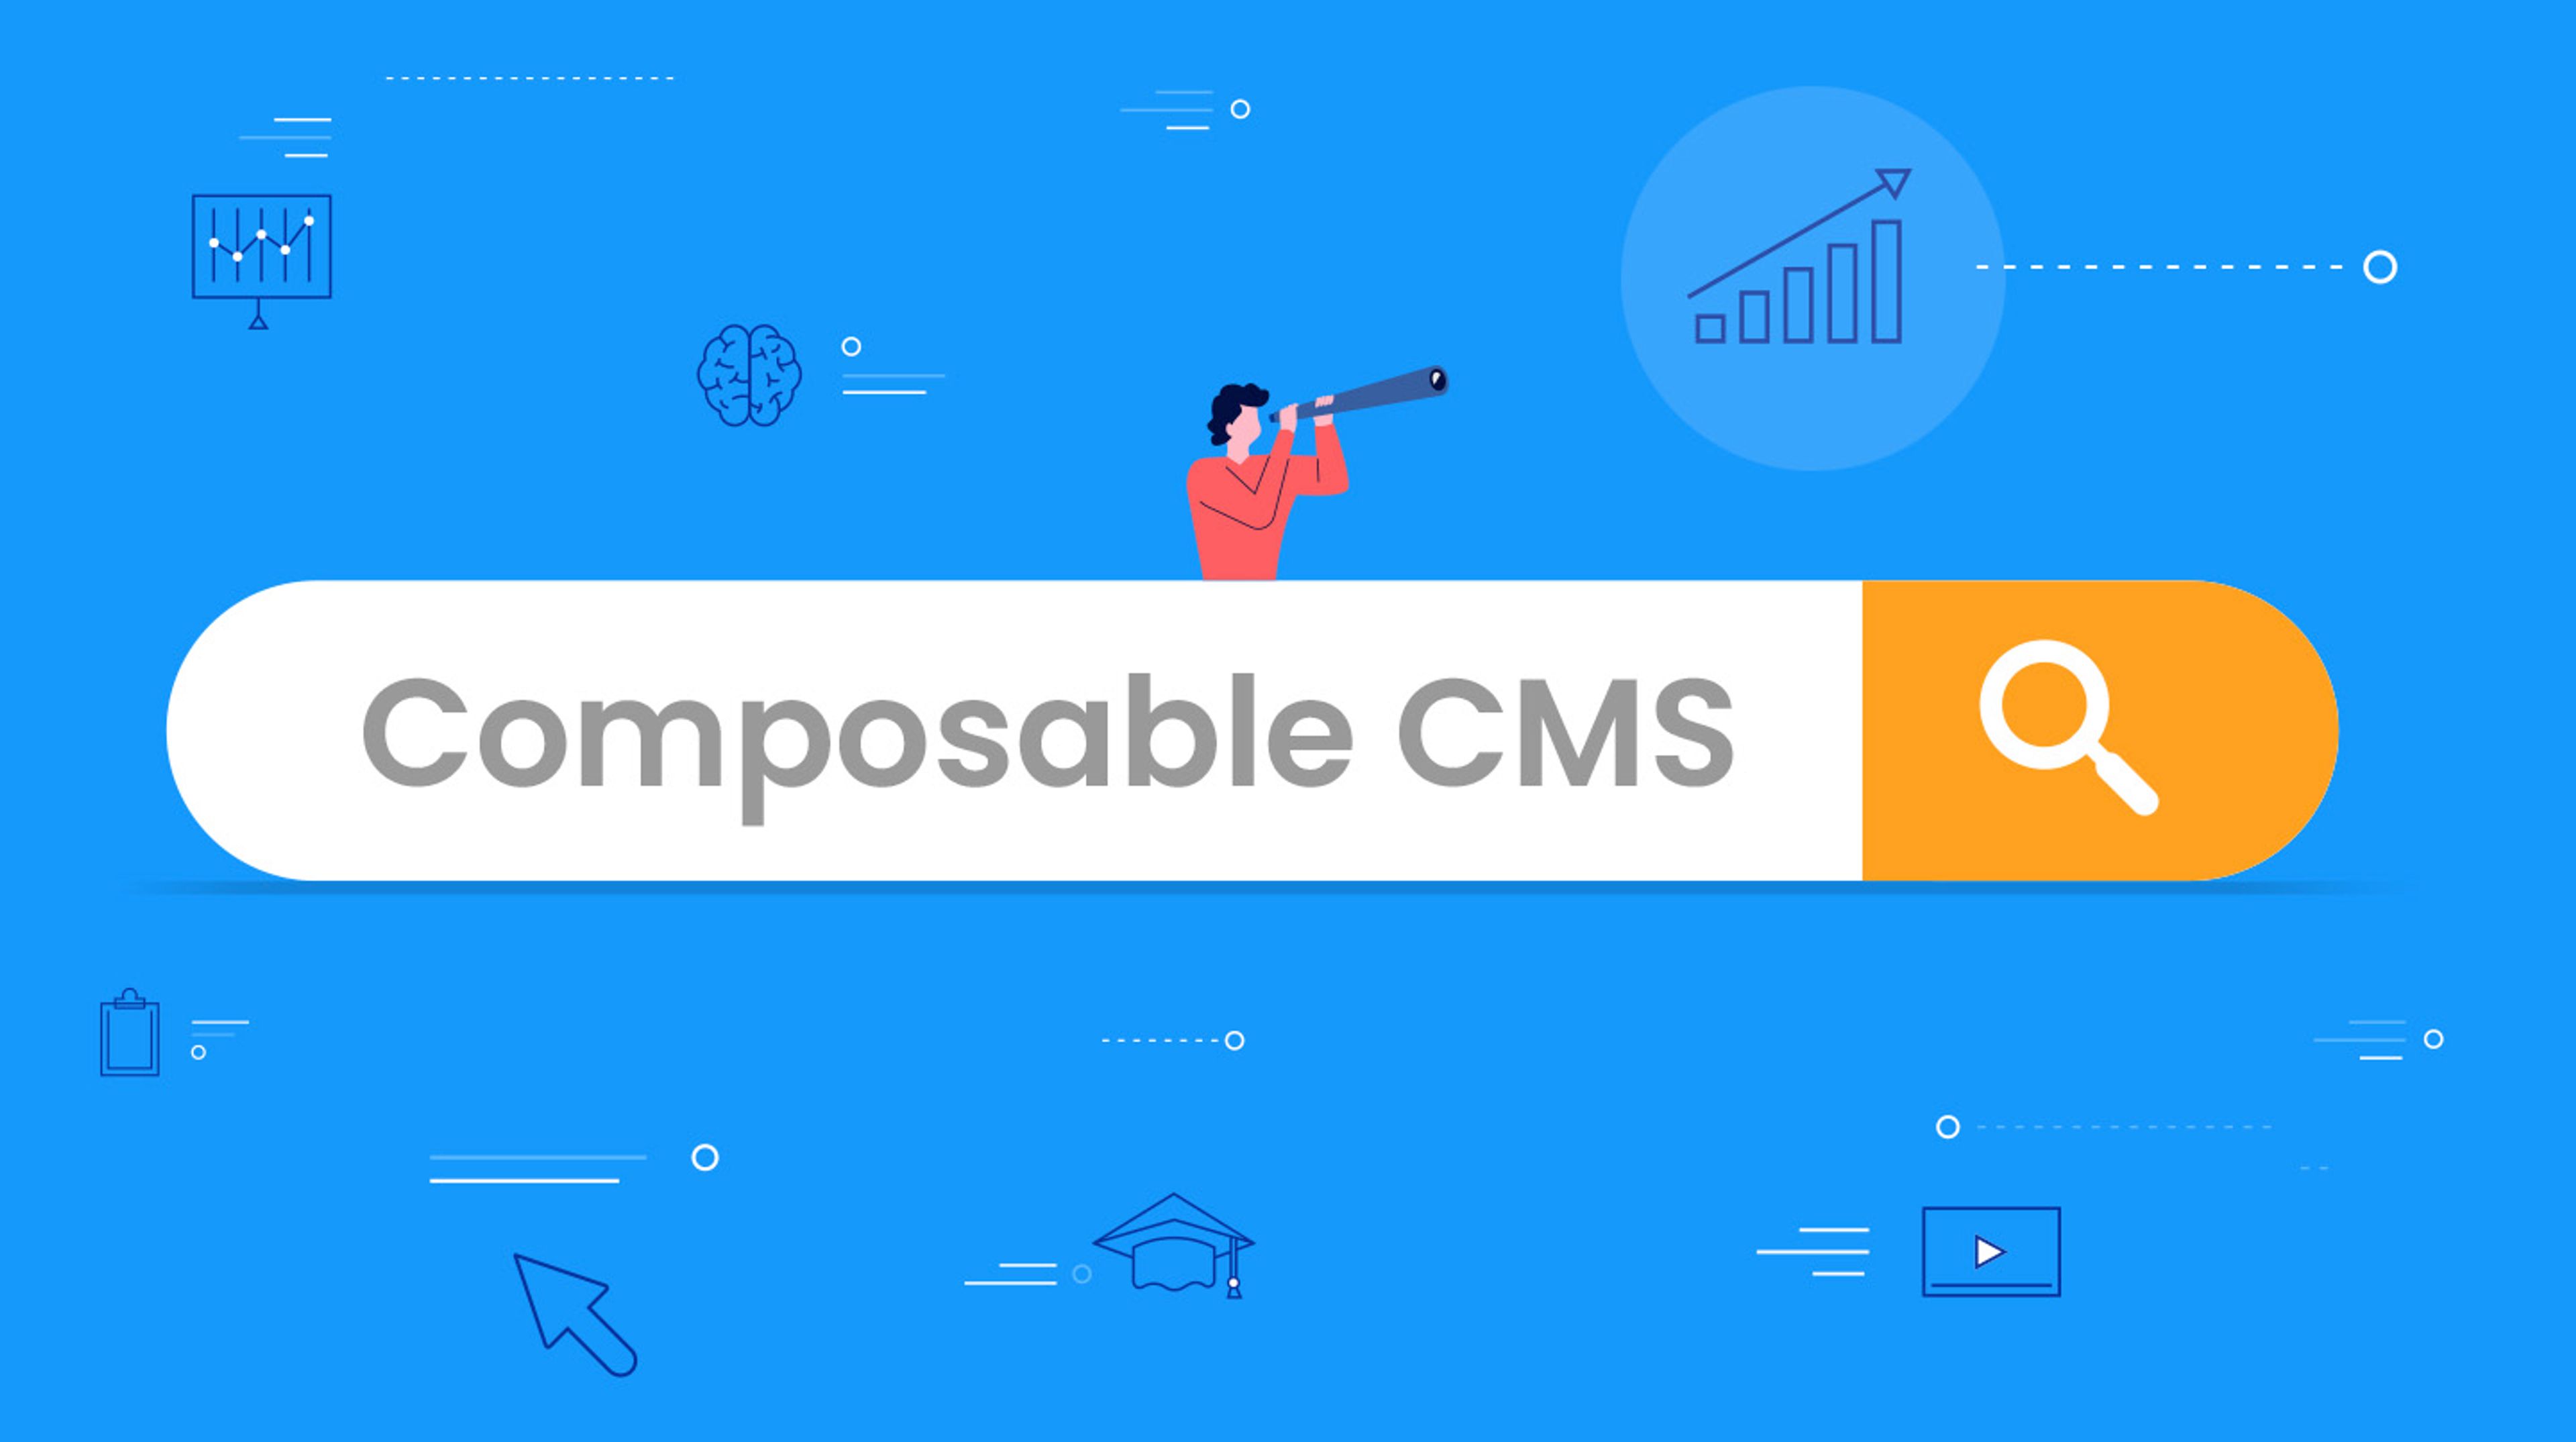 Composable CMS as a keyword search term in Google